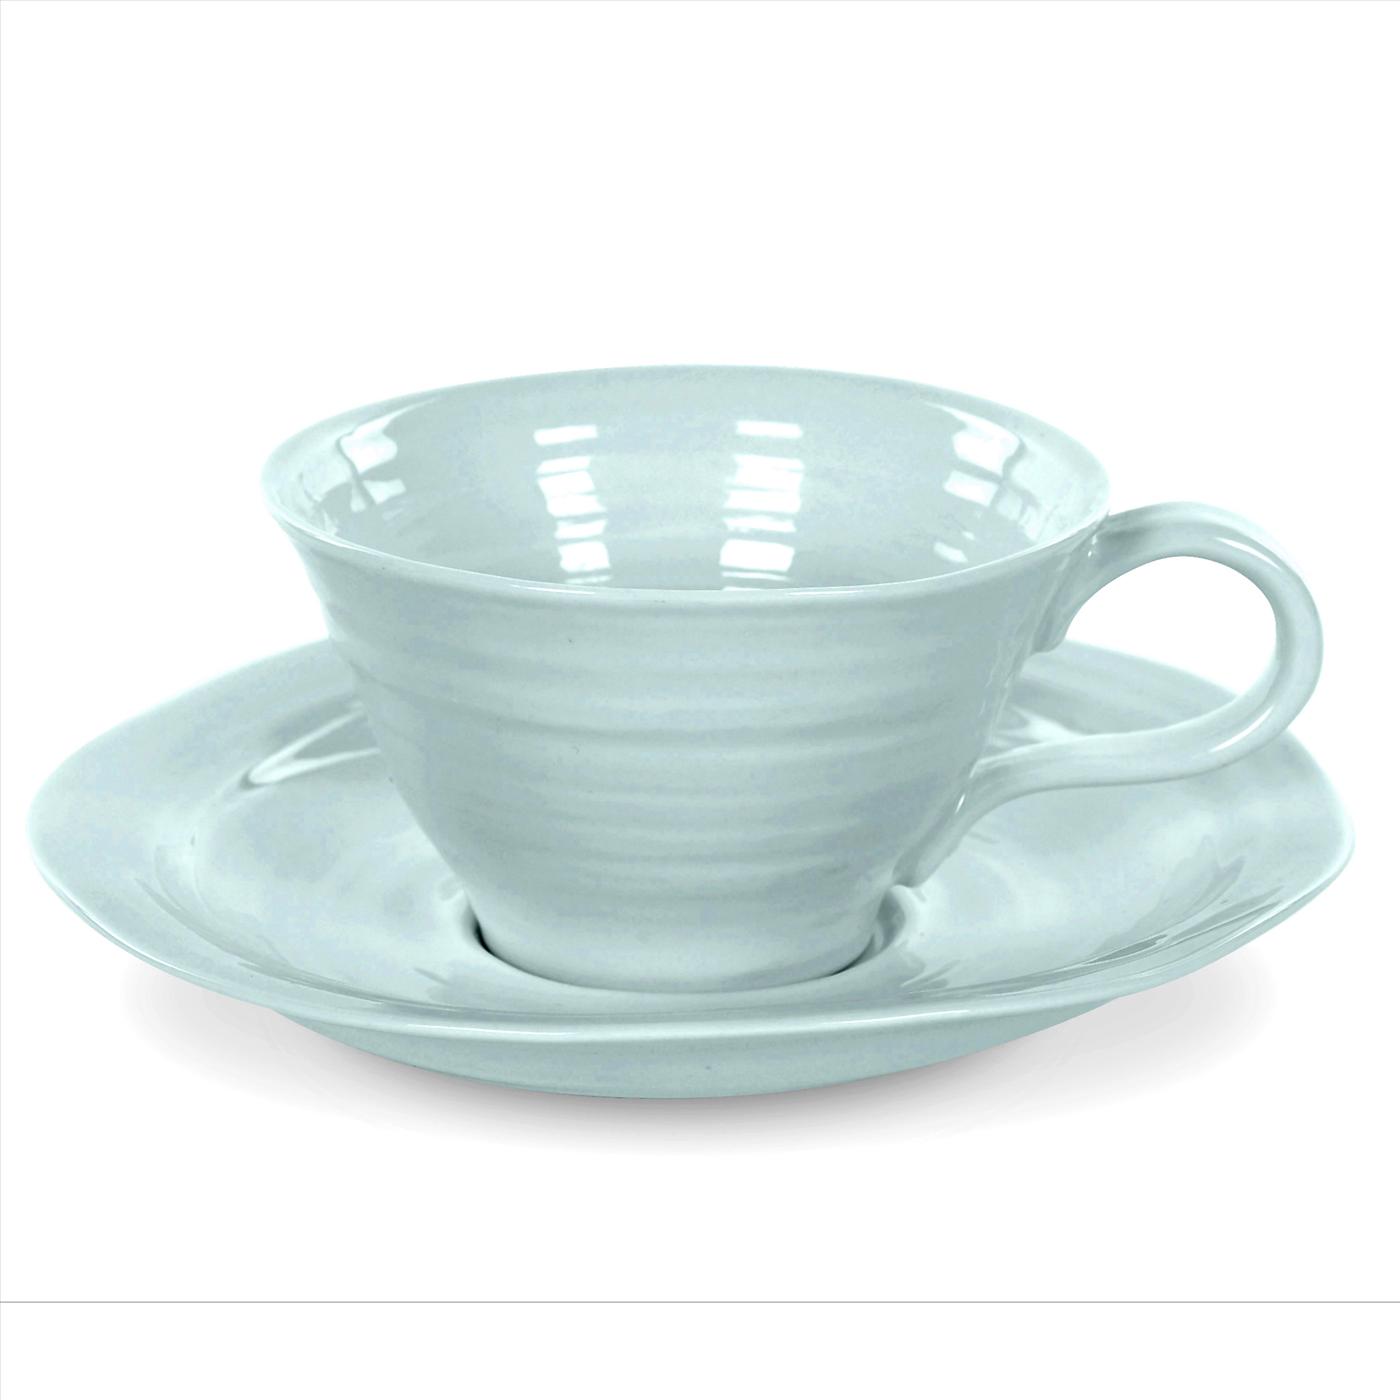 Portmeirion Sophie Conran Celadon Set of 4 Teacups and Saucers image number null